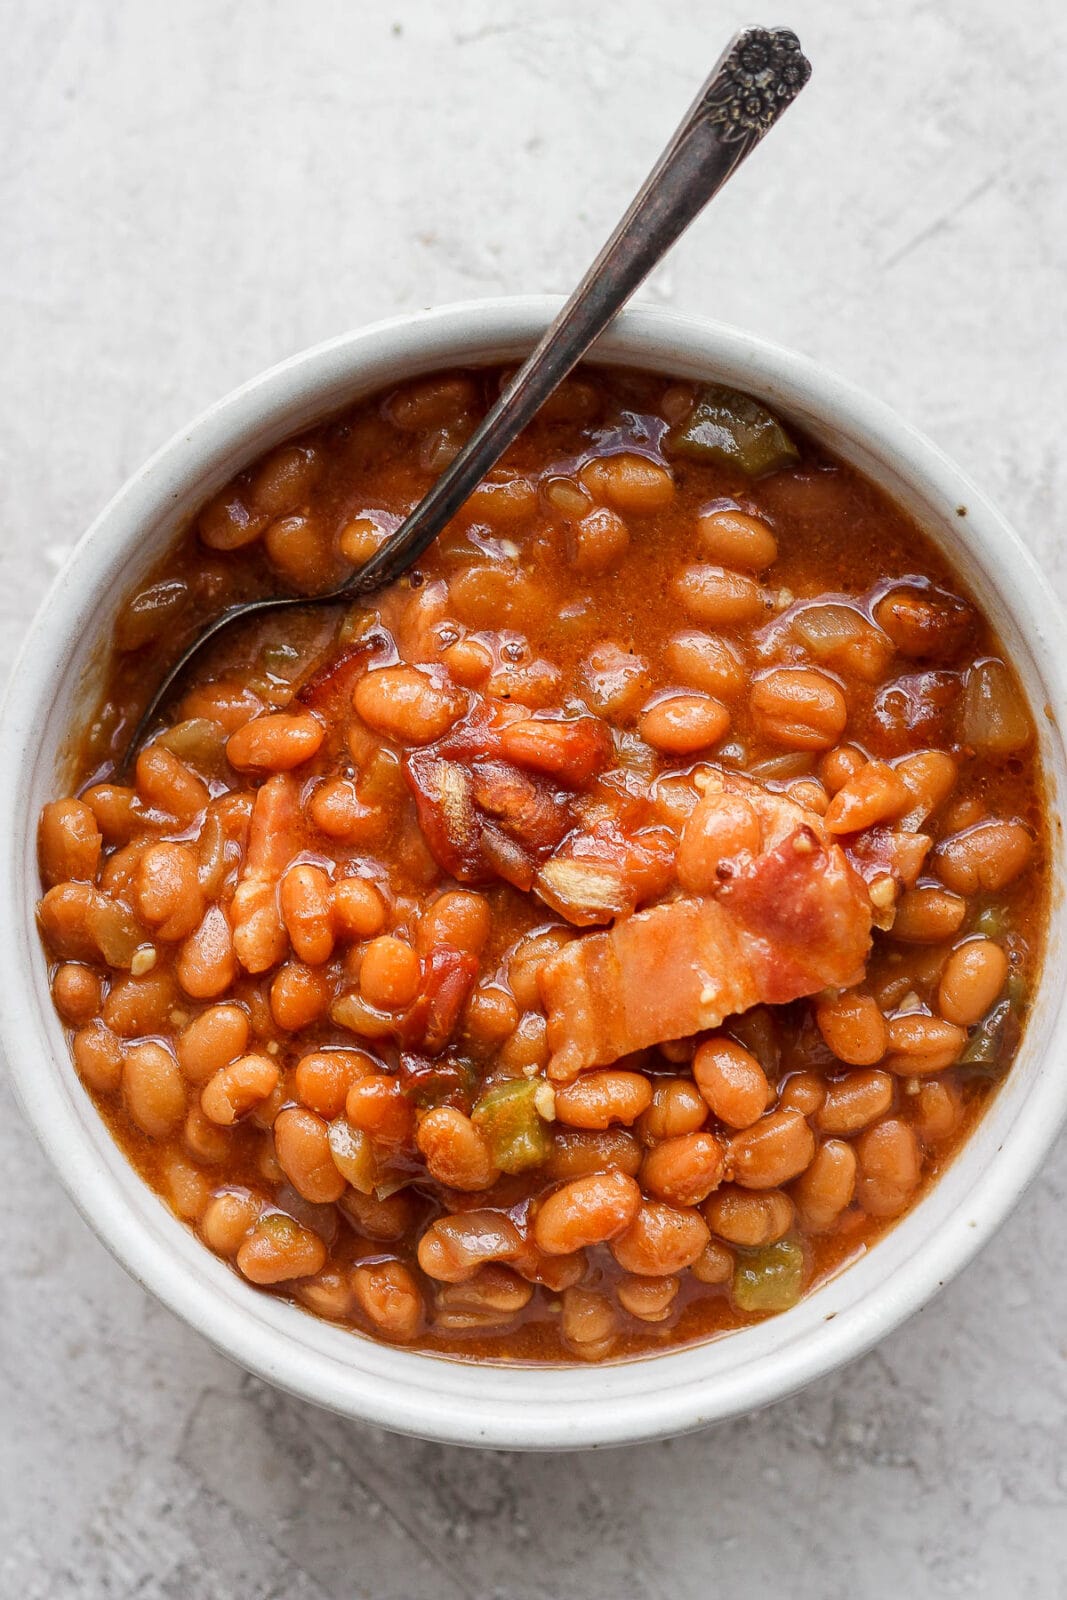 Smoked baked beans in a bowl with a spoon.